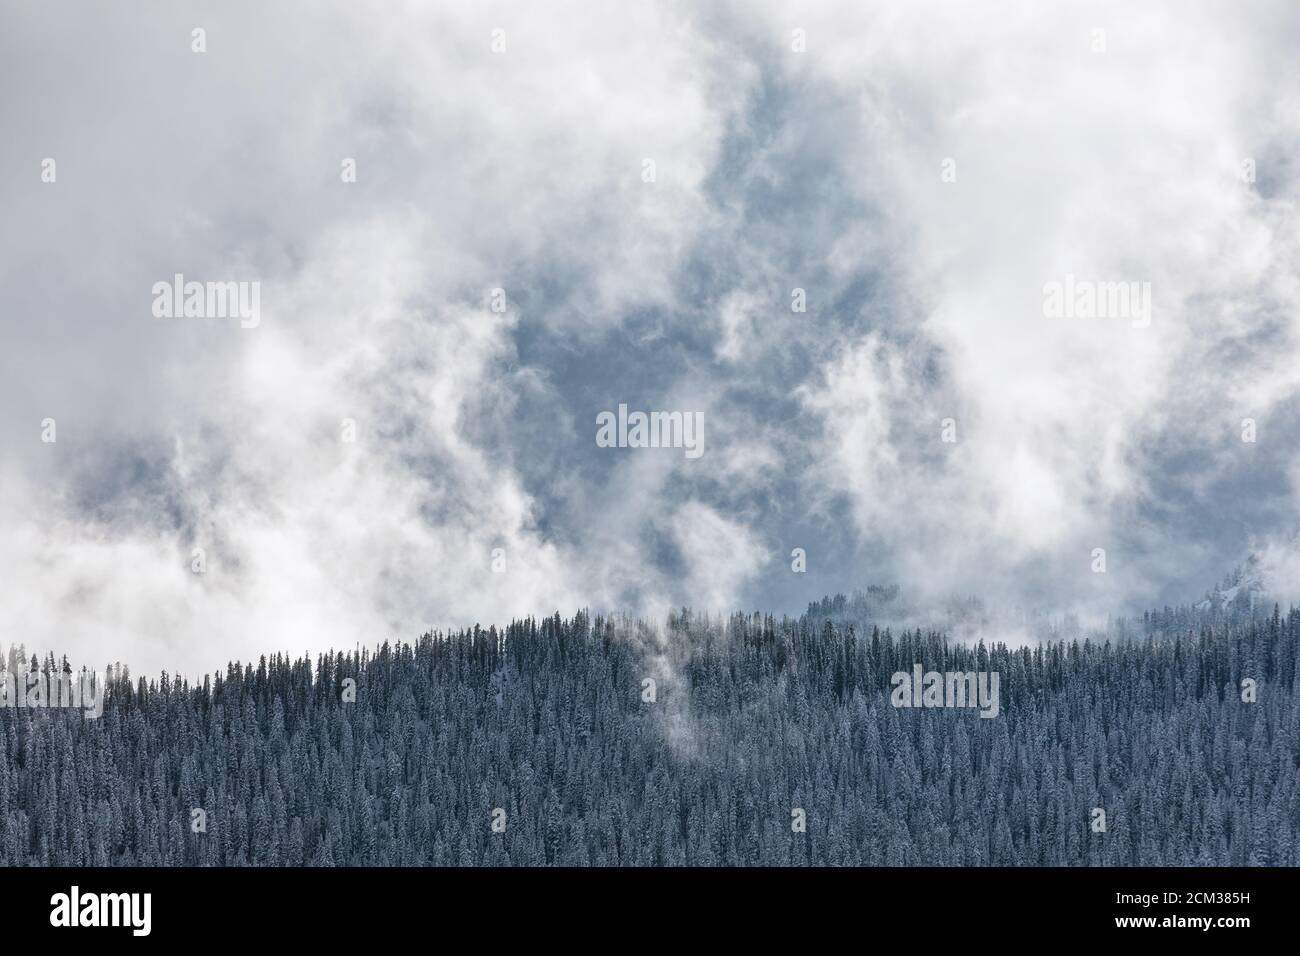 Winter forest backdrop with snowy trees and dramatic clouds Stock Photo